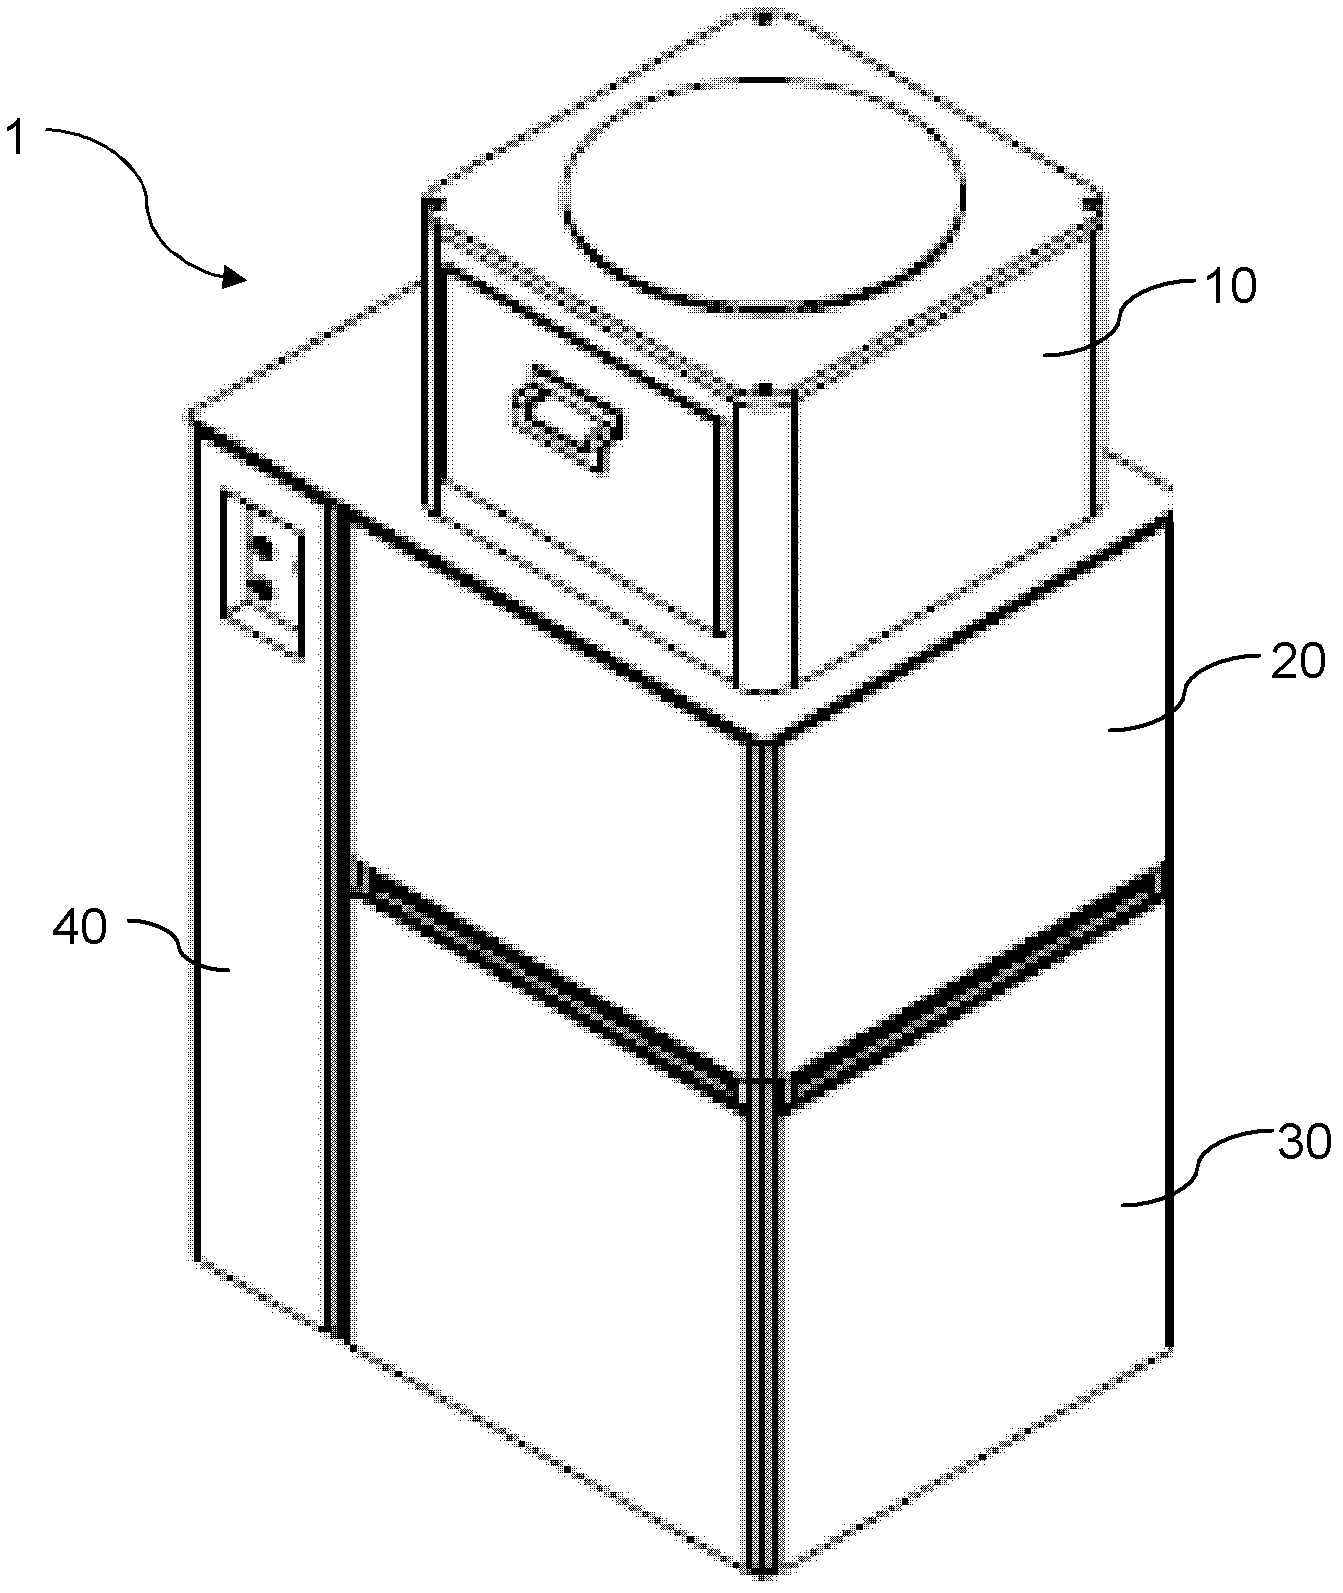 Semiconductor processing device